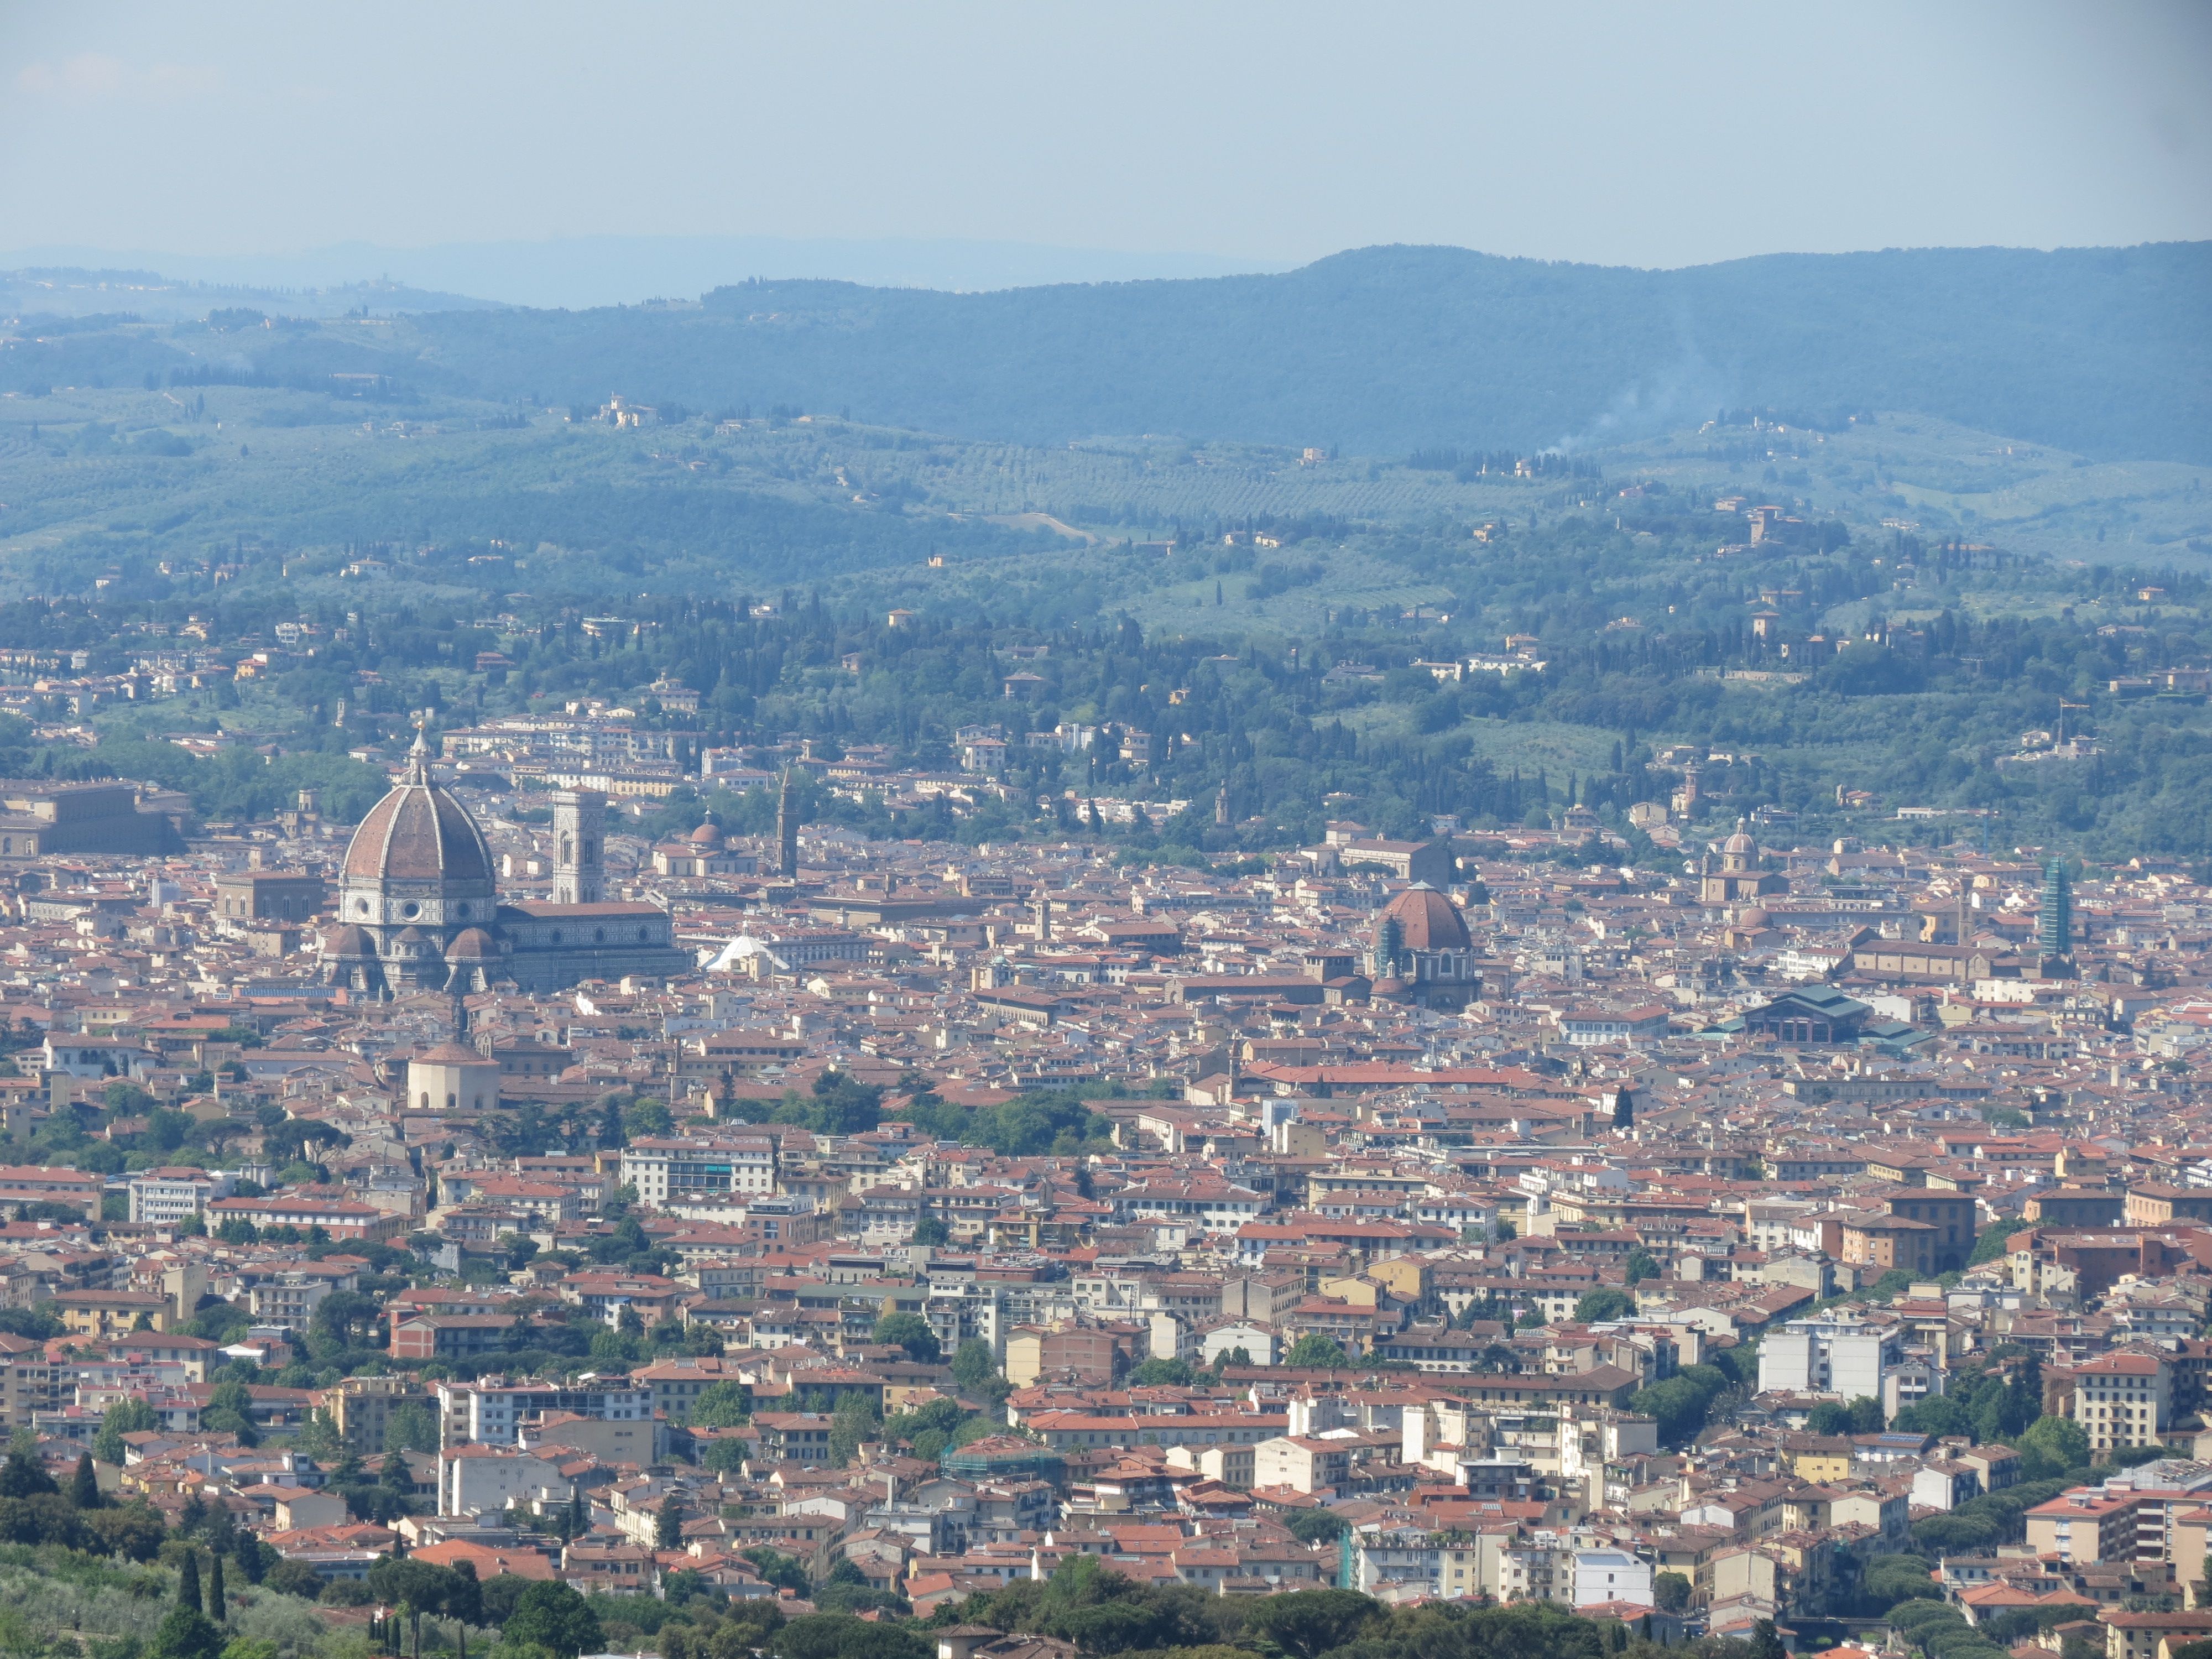 The Duomo from Fiesole